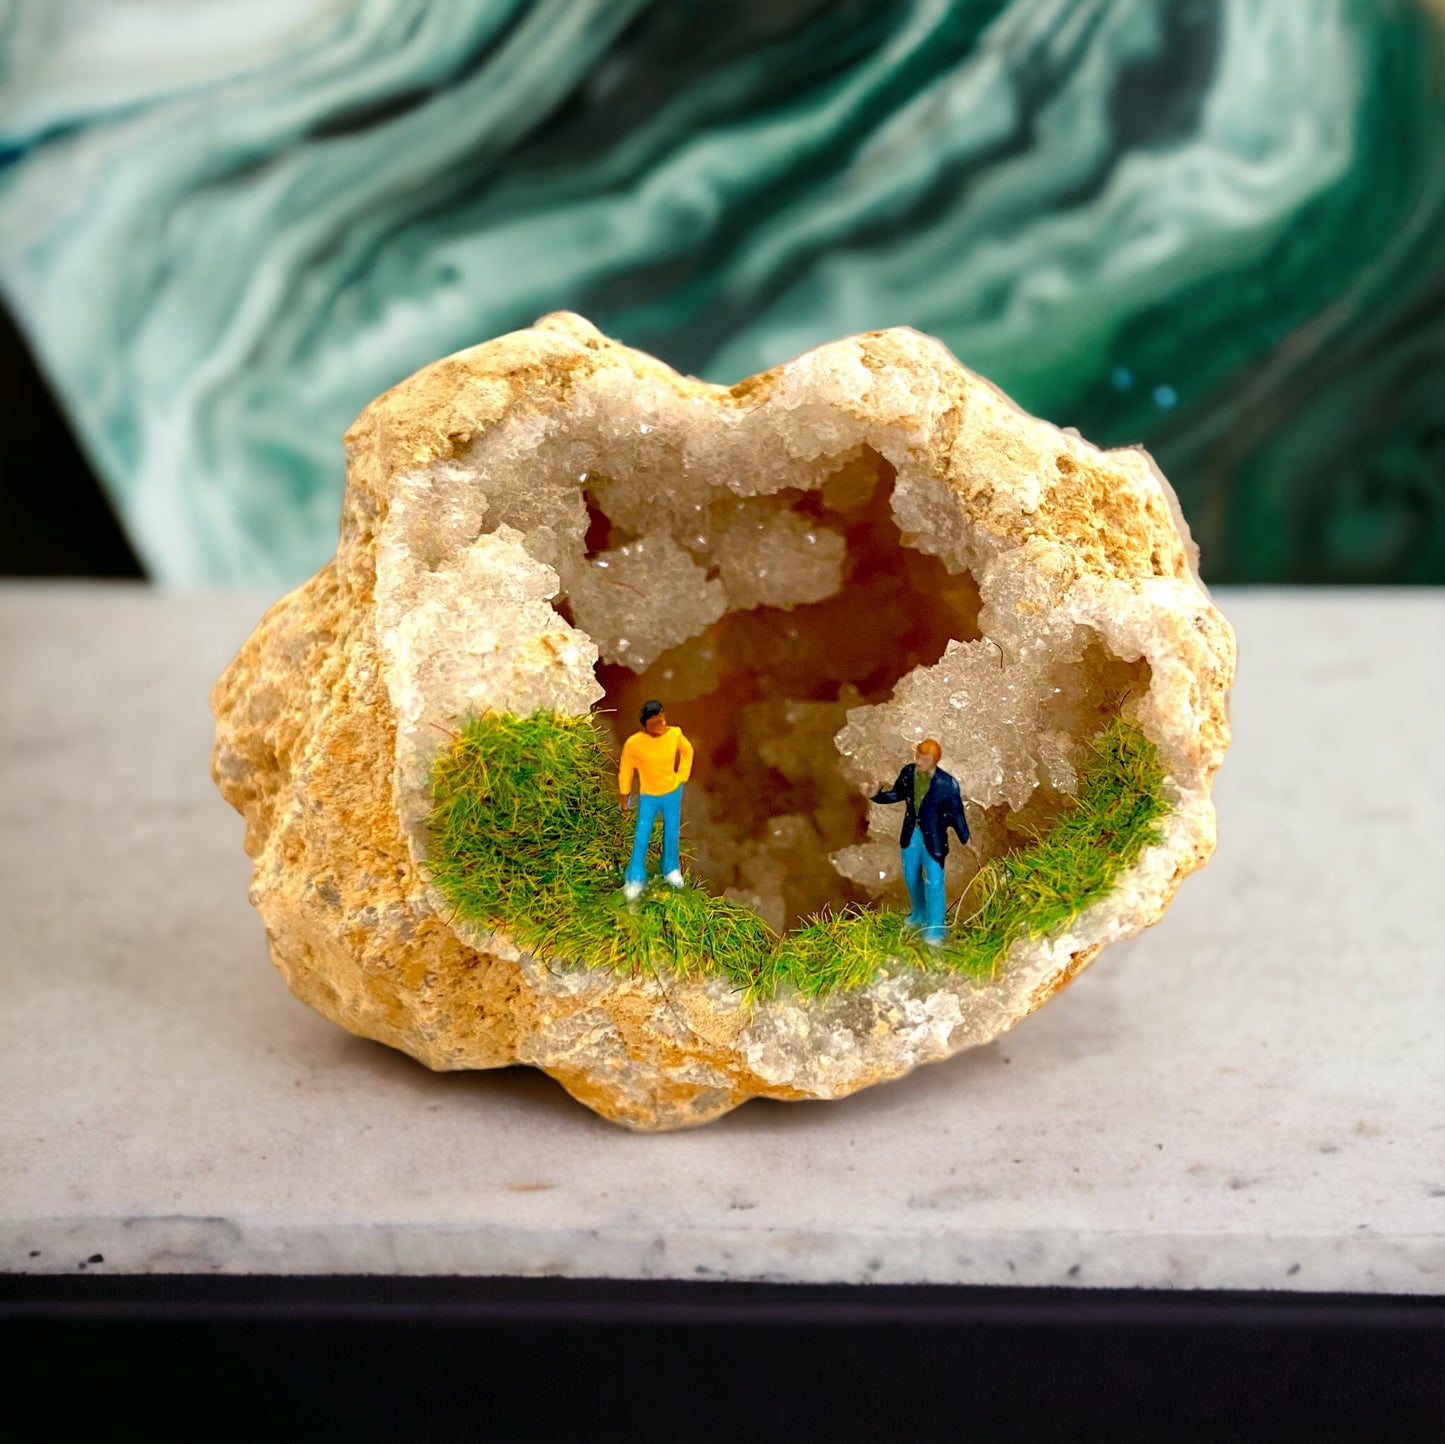 Geode Art piece w/ tiny people at “crystal cave entrance”